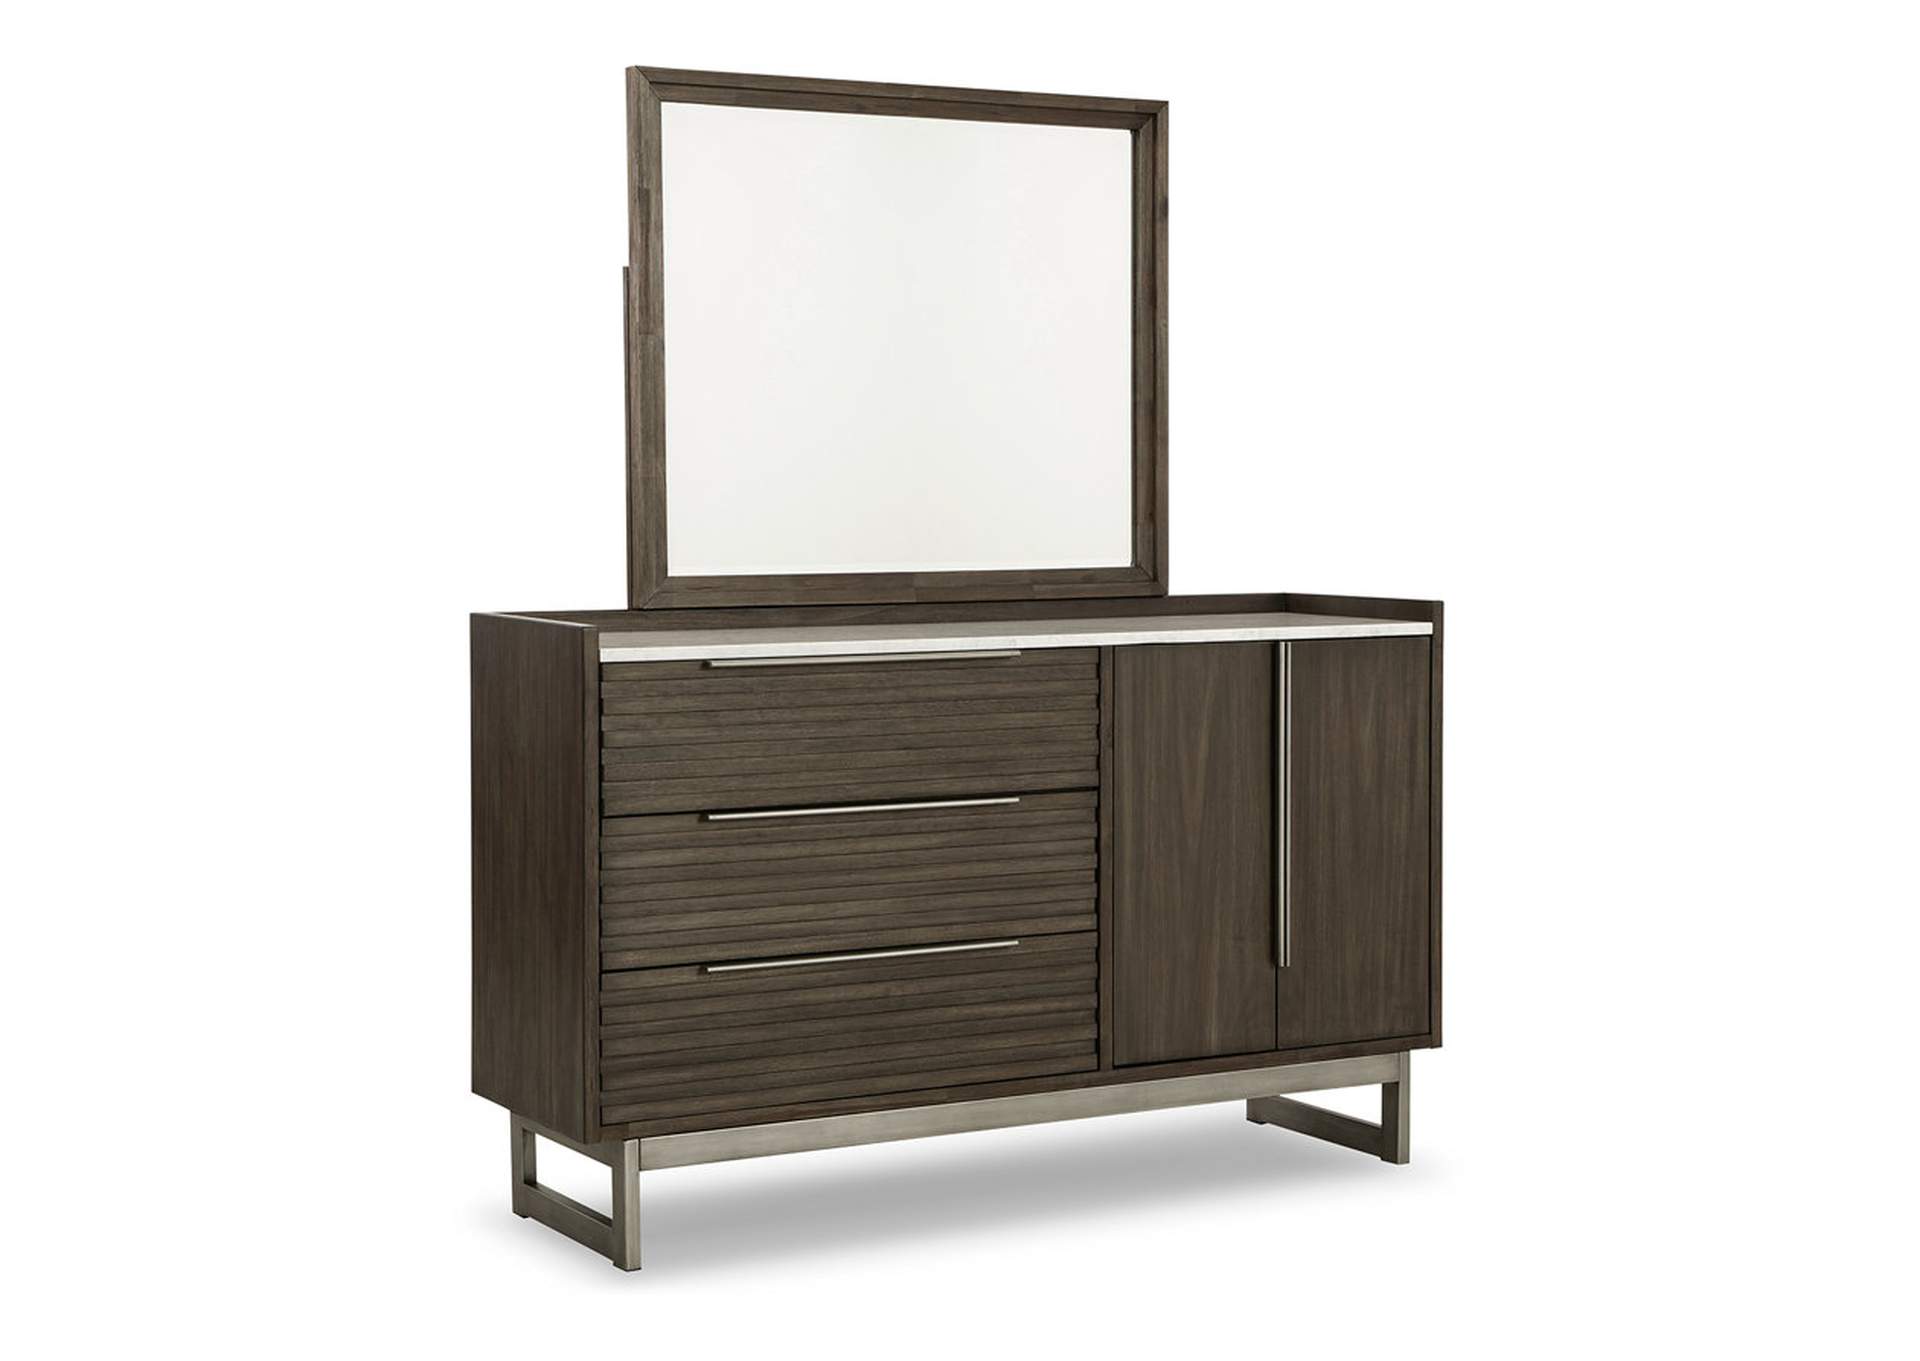 Arkenton Queen Panel Bed with Mirrored Dresser, Chest and Nightstand,Ashley